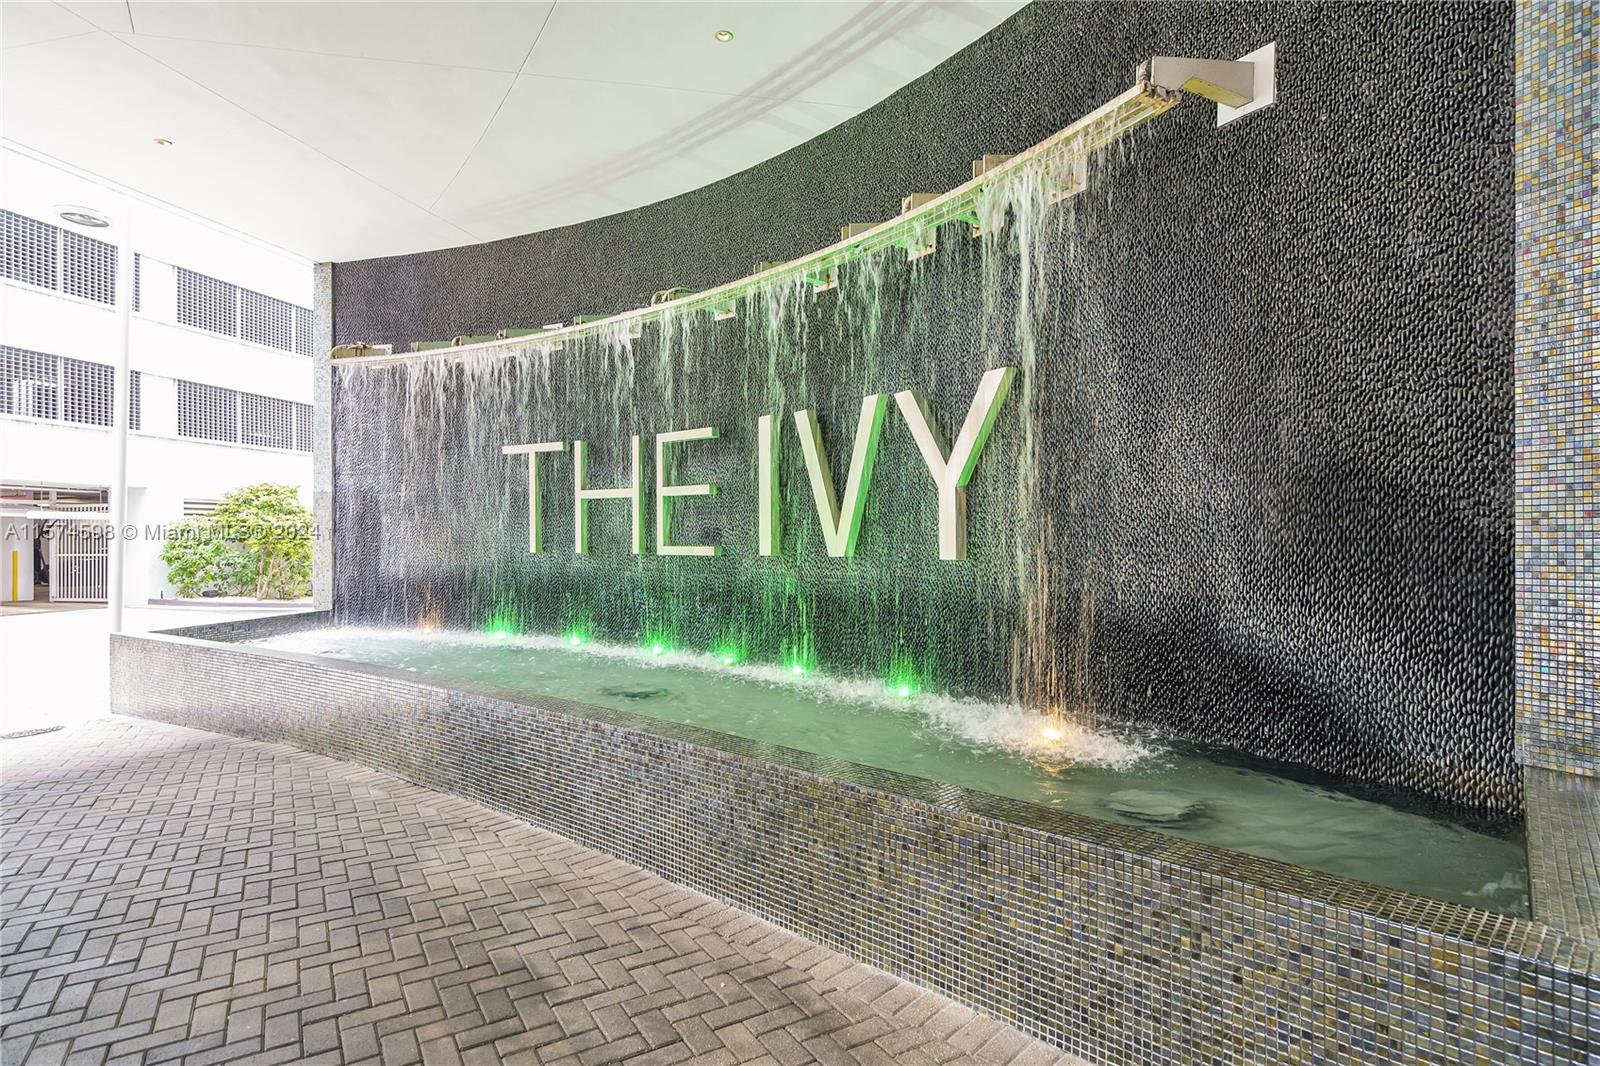 Welcome to the Ivy! This condo is priced to sell and is move-in ready, ideal for both owner-occupants and investors. Situated near Brickell and Downtown Miami, it offers easy access to shopping, dining, nightlife, and beaches. Enjoy amenities like a spa, gym, pool, and playground, along with secure, gated entry and valet service. Don't miss out—schedule a showing today!